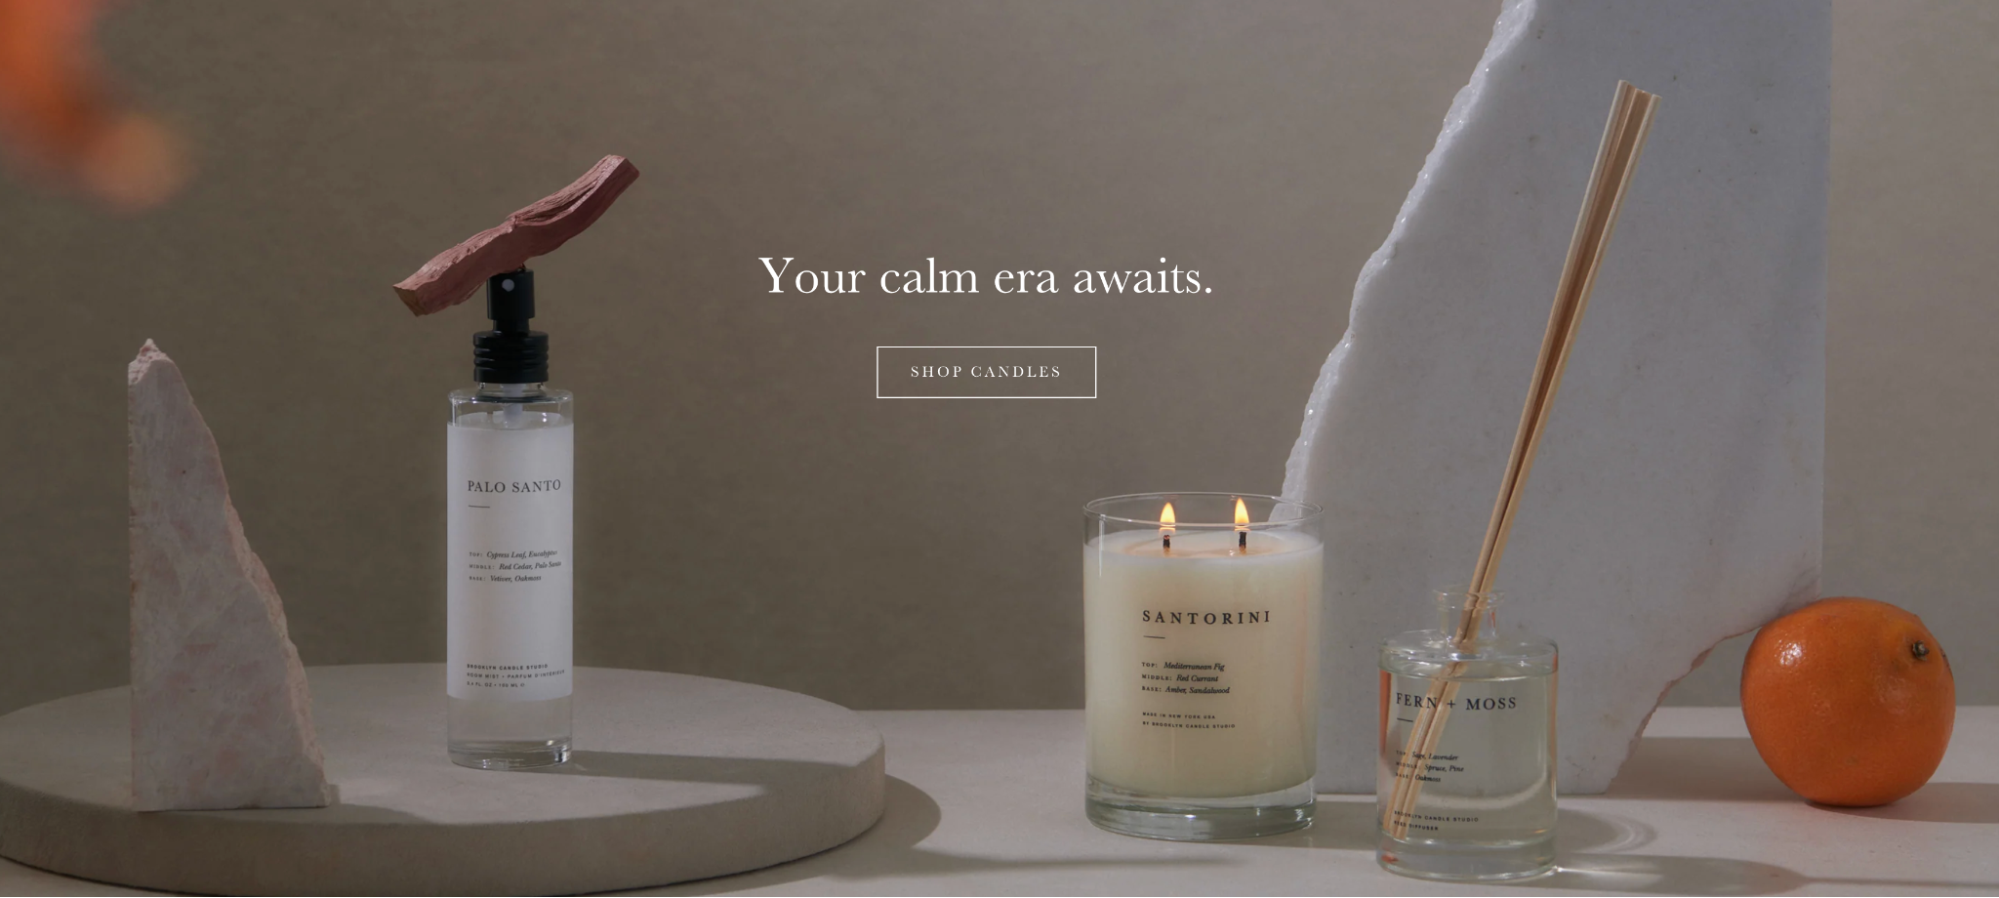 An ad for Brooklyn Candle Studio, a candle making business that was started in a studio apartment.